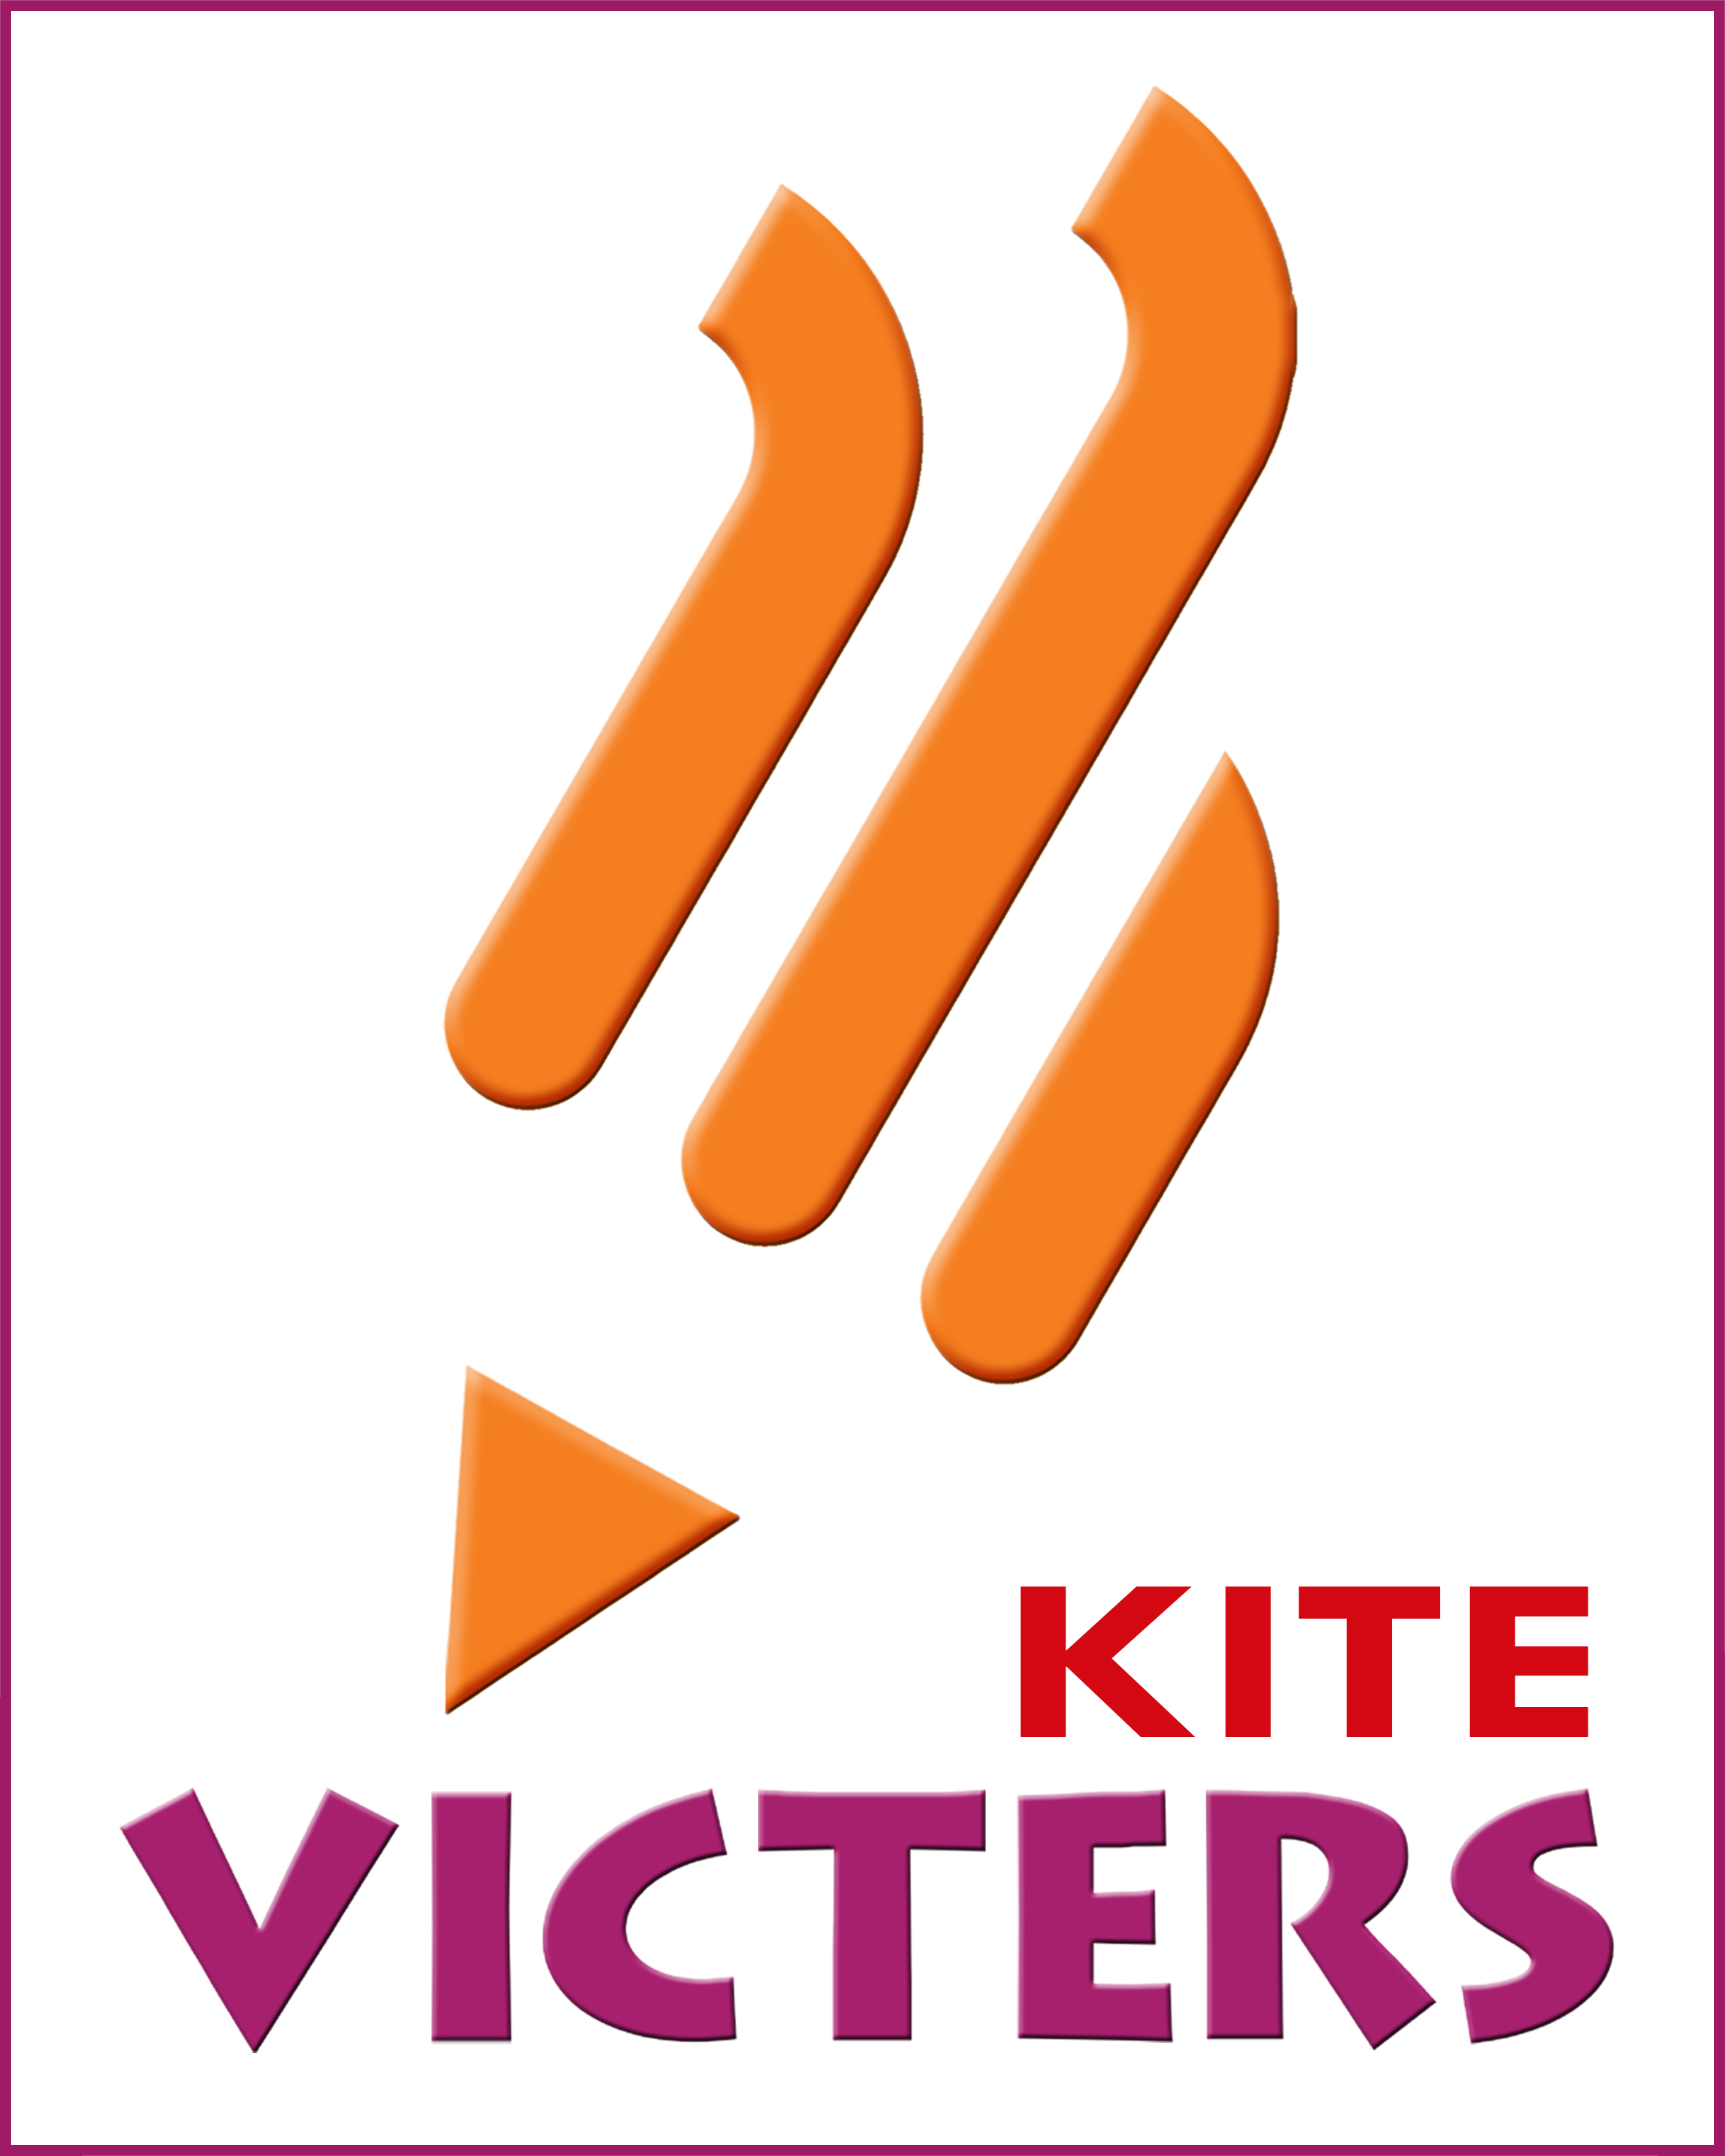 VICTERS